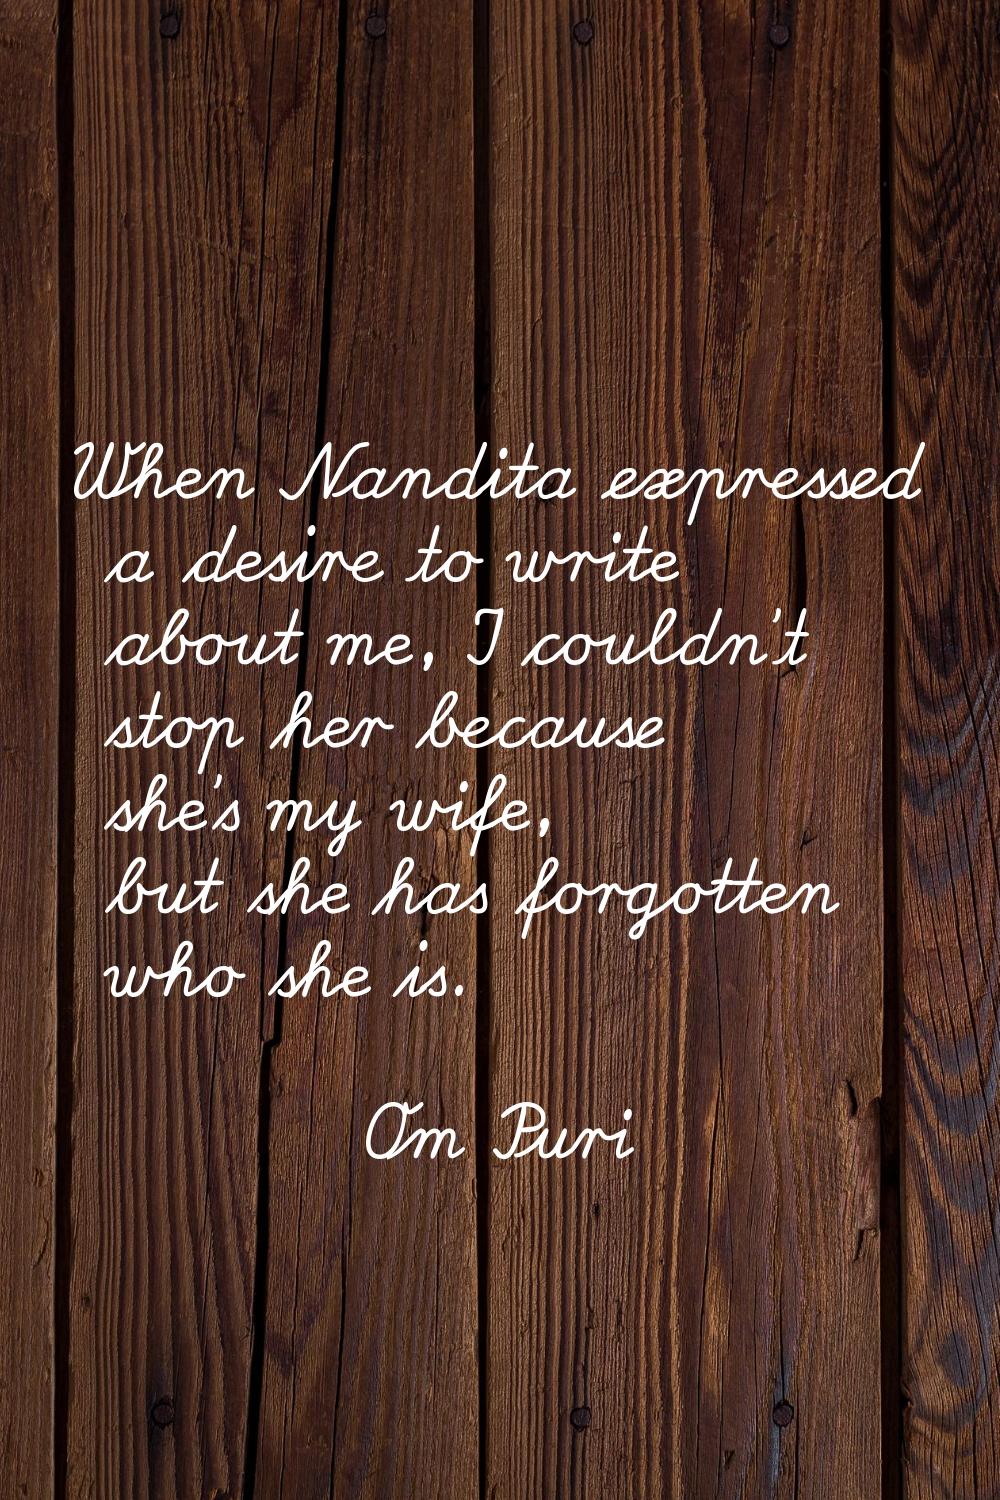 When Nandita expressed a desire to write about me, I couldn't stop her because she's my wife, but s